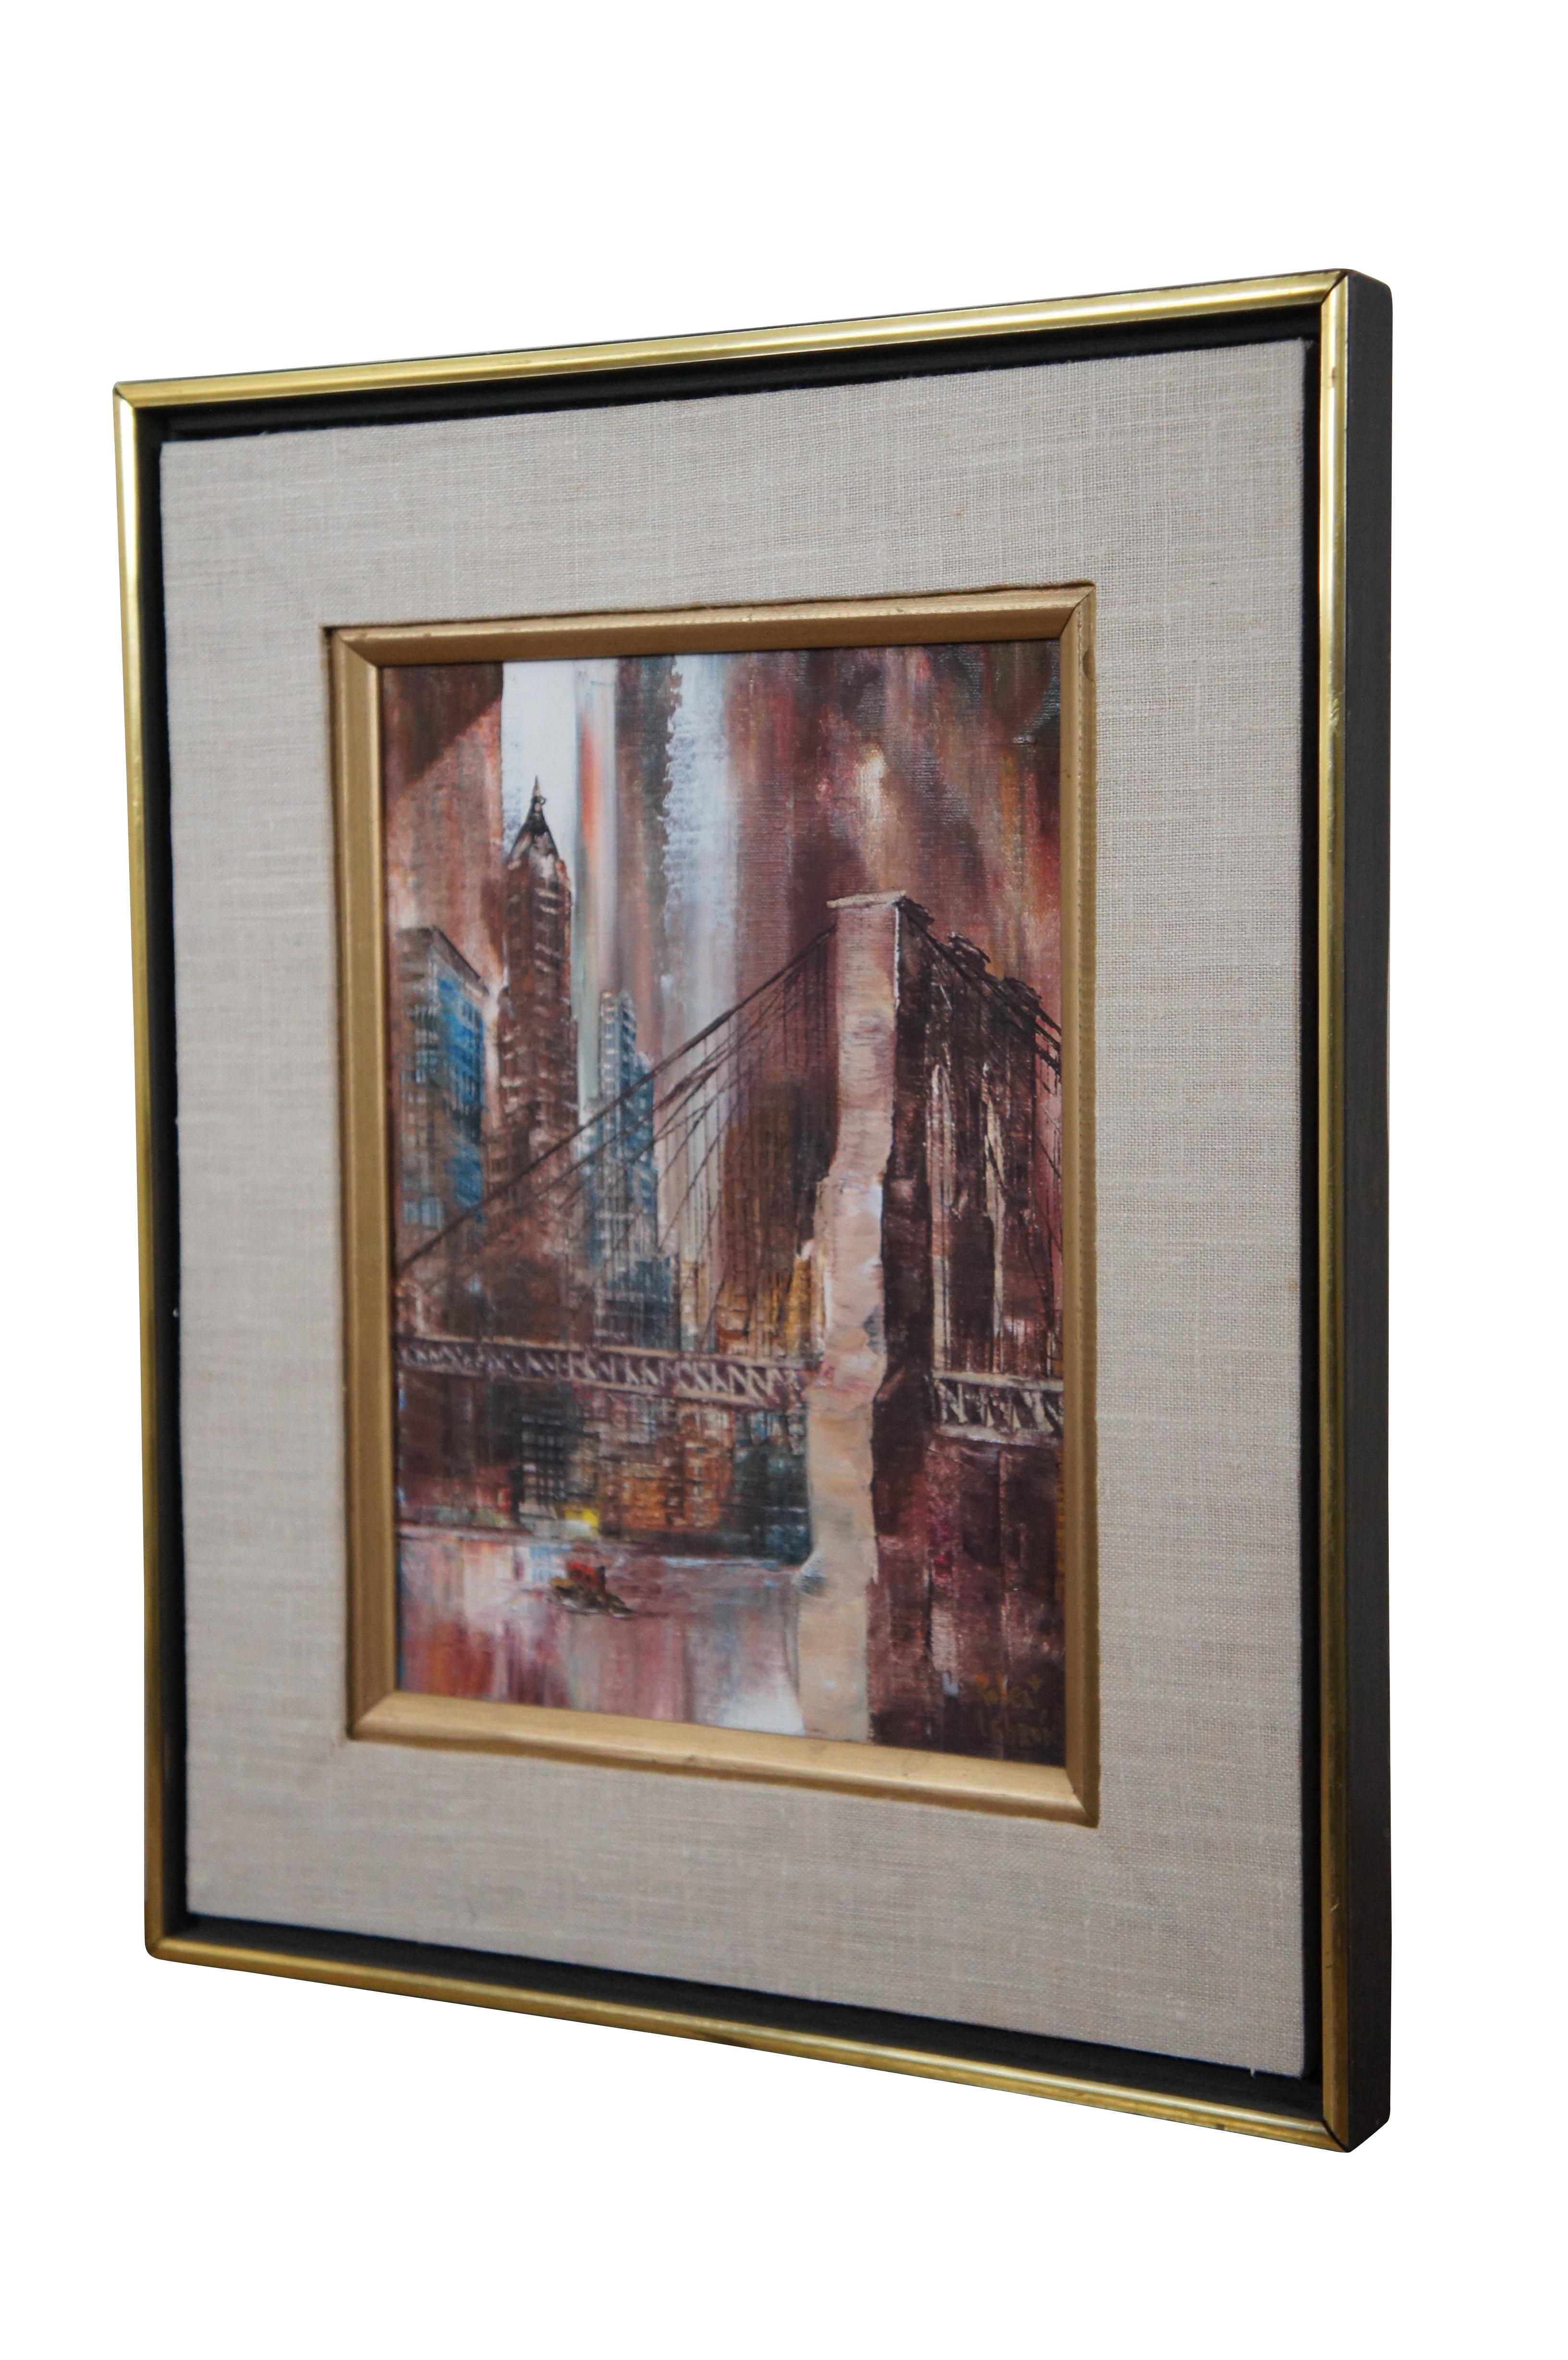 Vintage oil on canvas expressionist / semi-abstract cityscape painting of New York City and the Brooklyn Bridge by Robert Lebron. Signed in lower right. Framed in a gilded double frame with an off-white linen mat.

